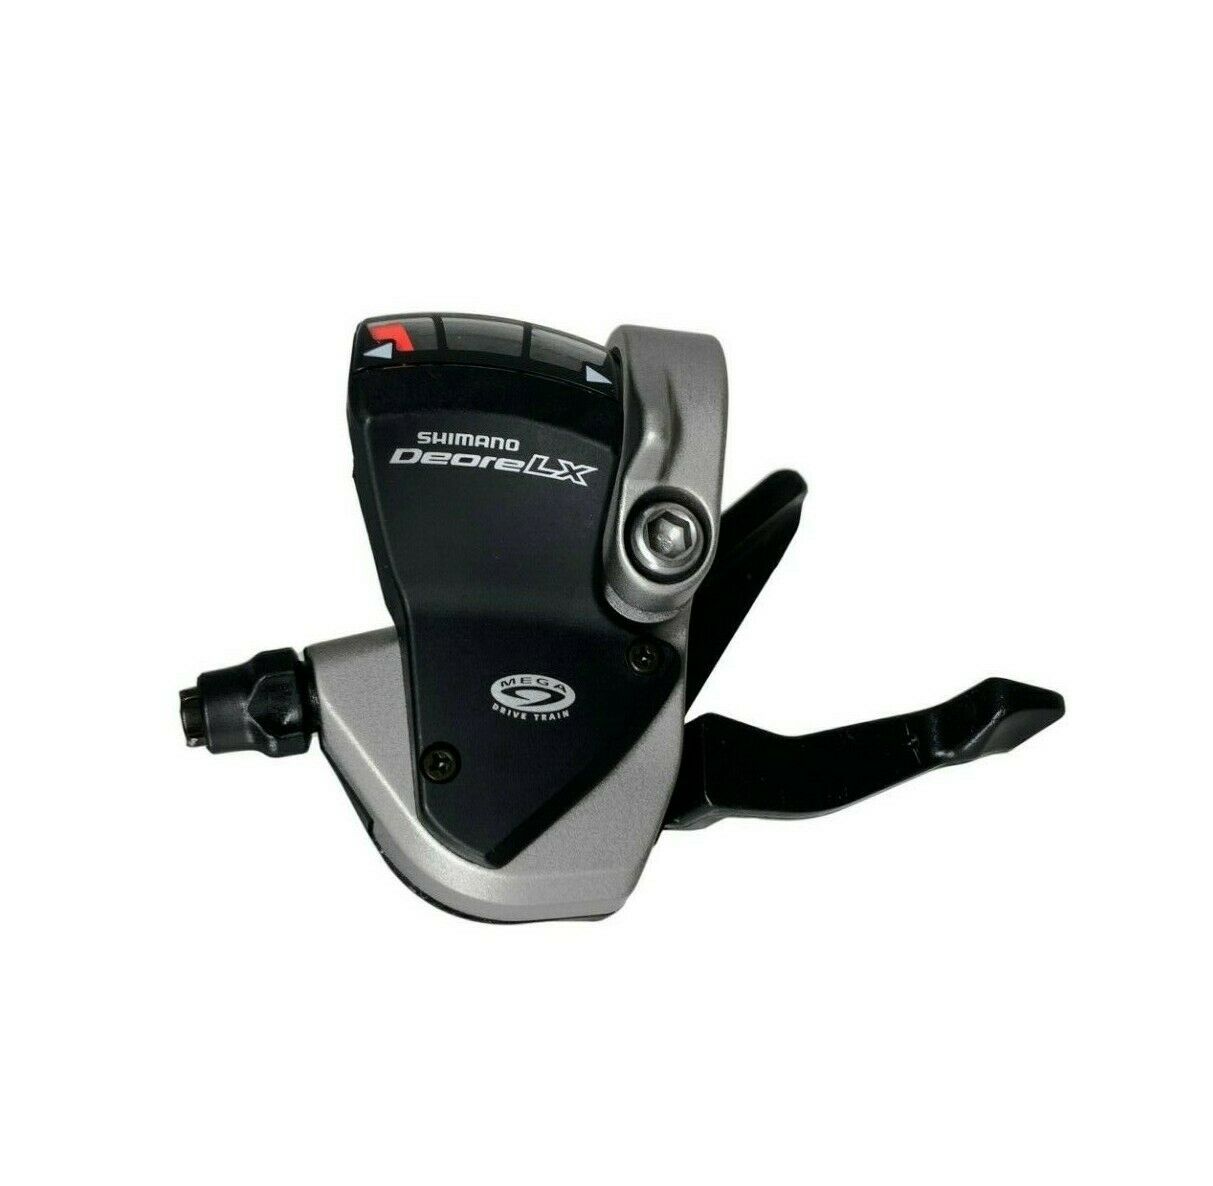 Shimano SL-M571 Deore LX Shifter - 3 Speed Left - 27 Speed Compatible - Sportandleisure.com (6968002412698)